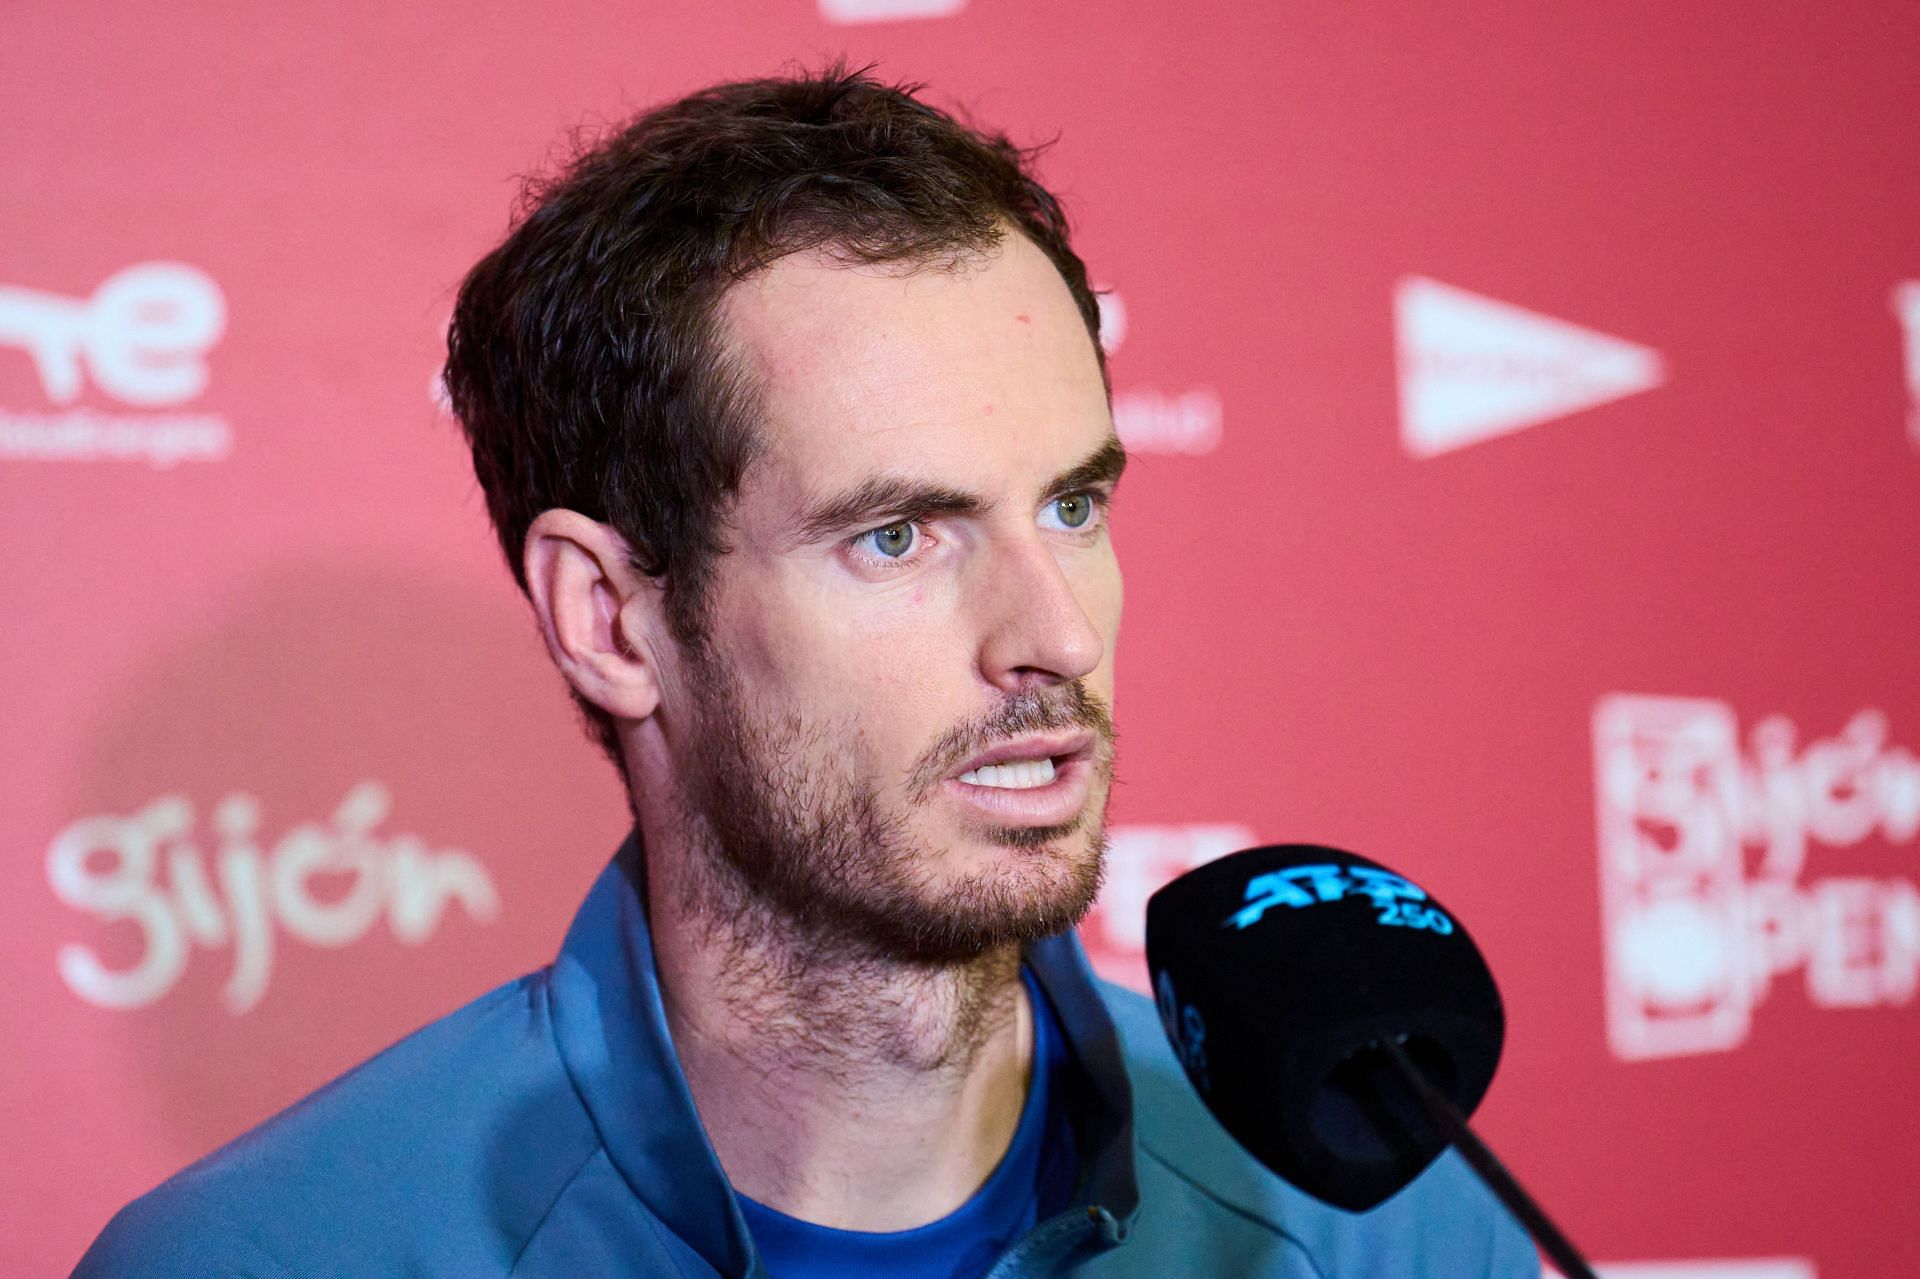 Andy Murray has produced some promising performances so far this season